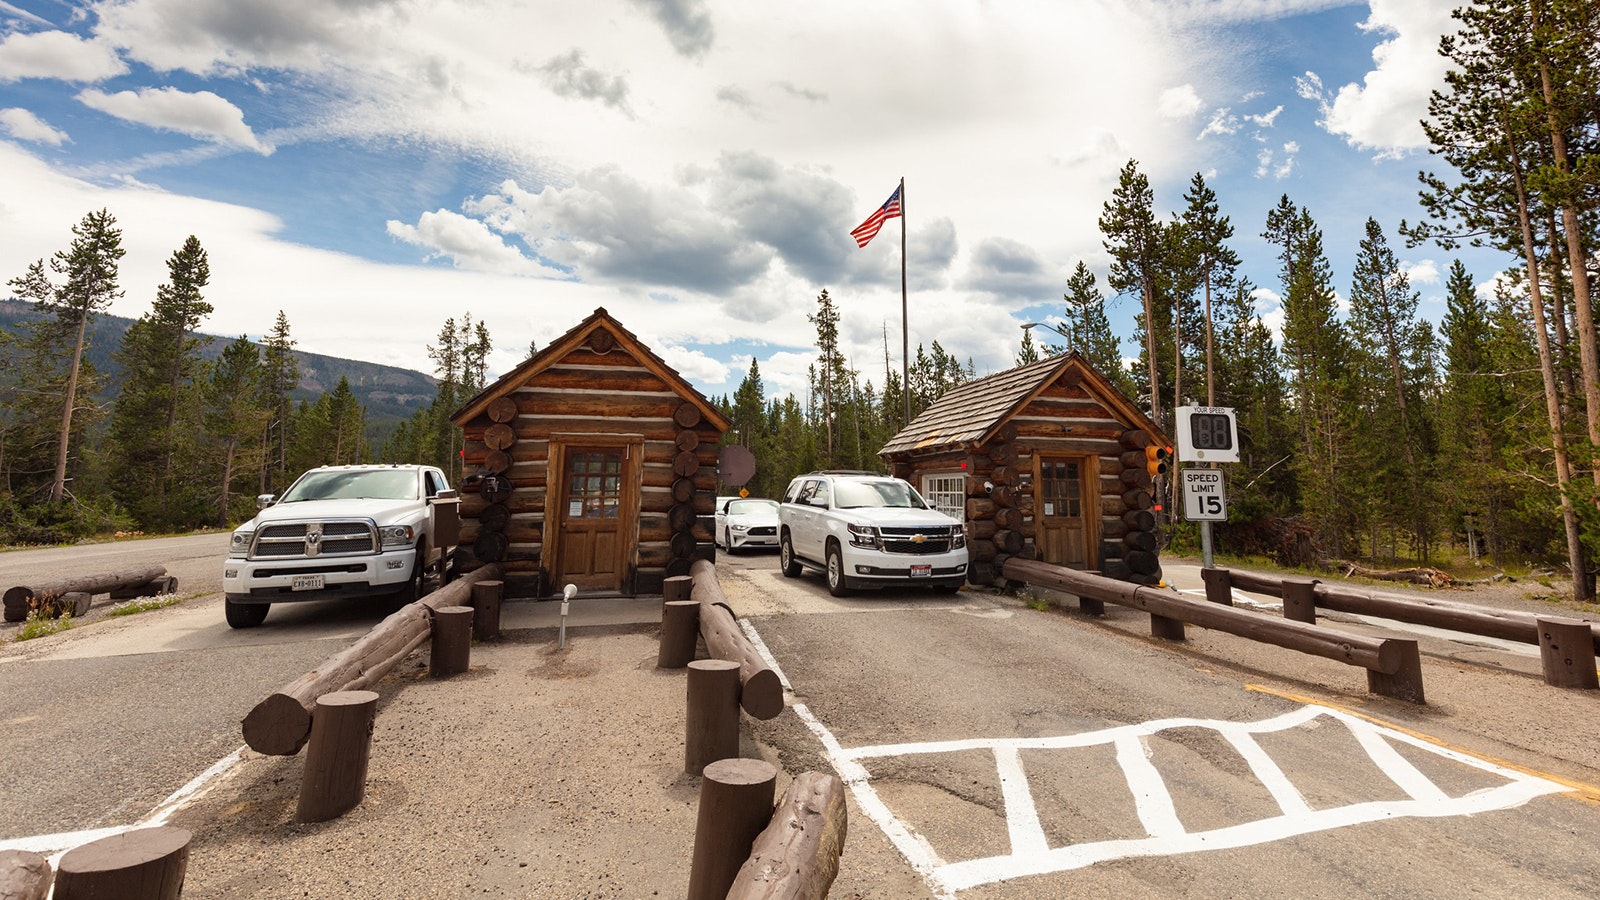 The National Park Service is trying a pilot program at several parks to not accept cash.